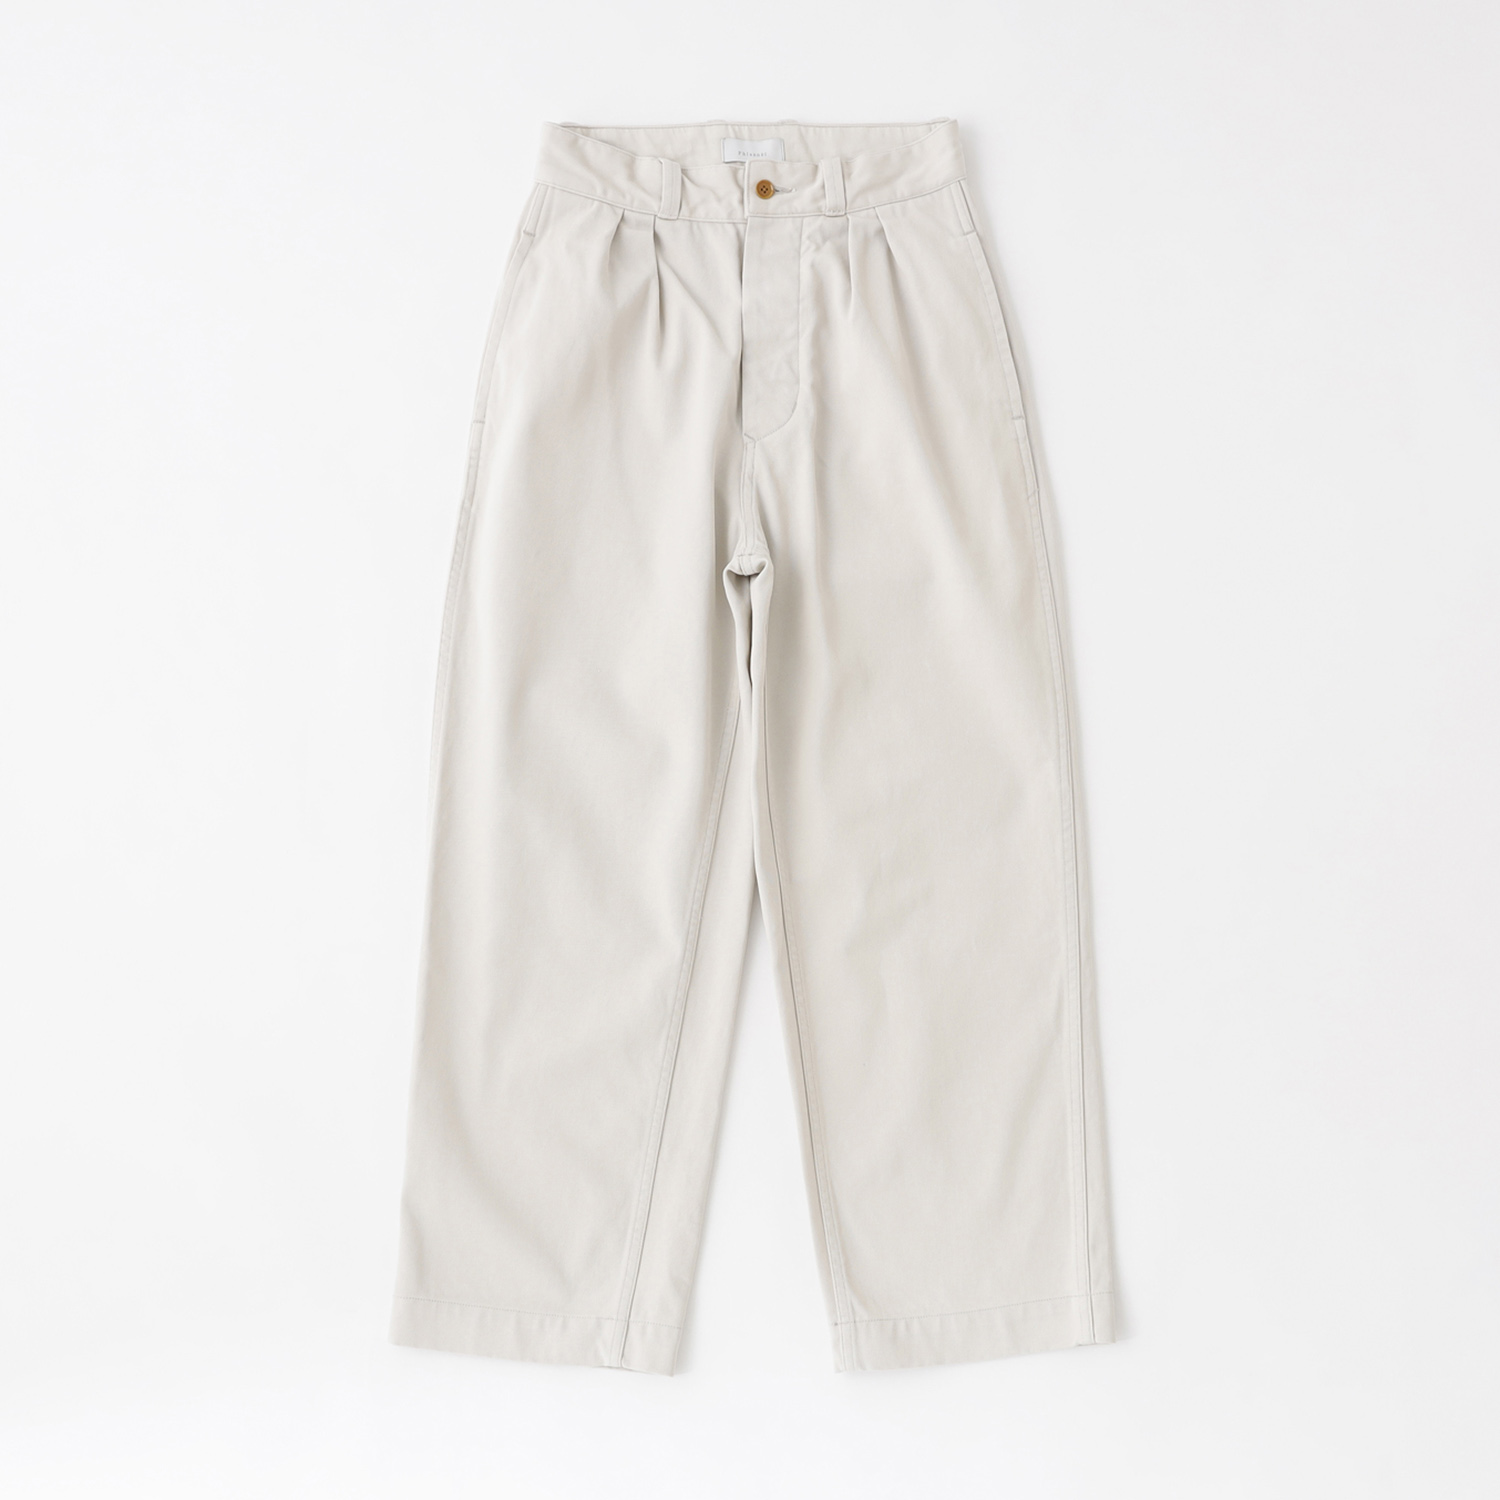 Very Goods | BLOOM&BRANCH WEB SHOP - Phlannel Cool Cotton Chino 